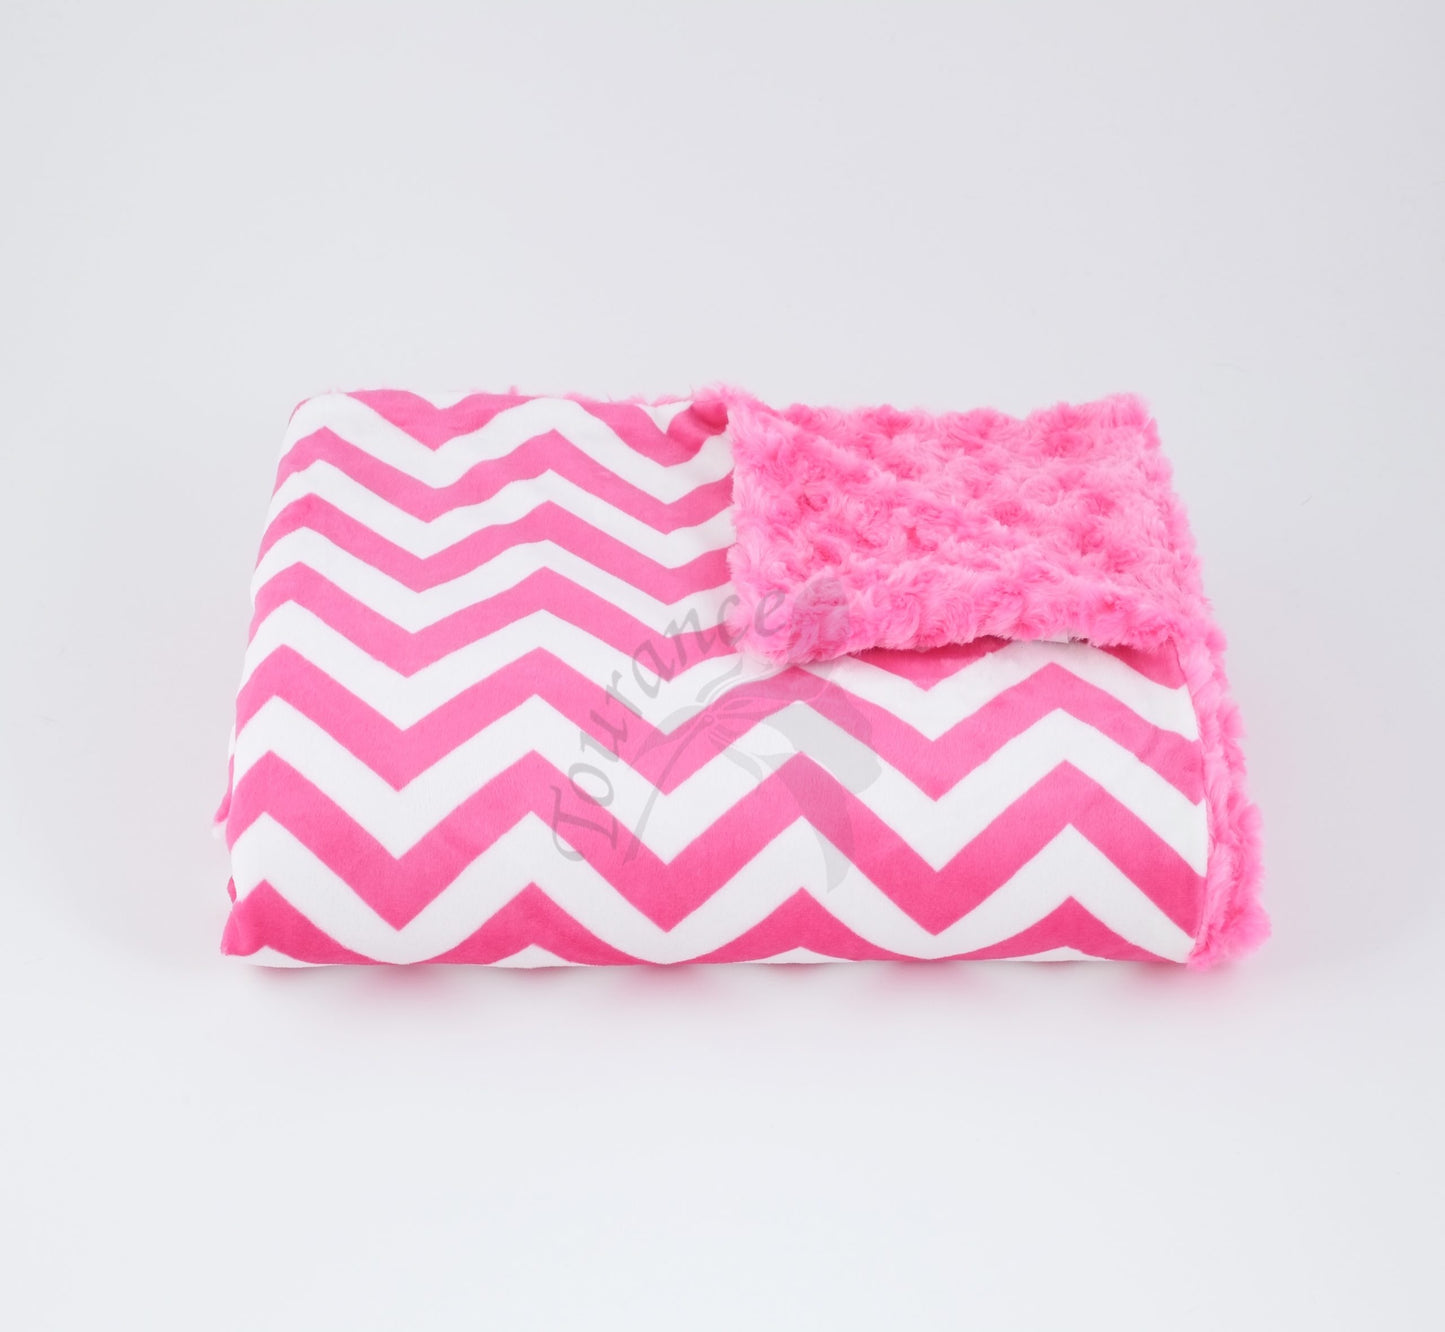 Chevron Blanket In Hot Pink with Tourance watermark